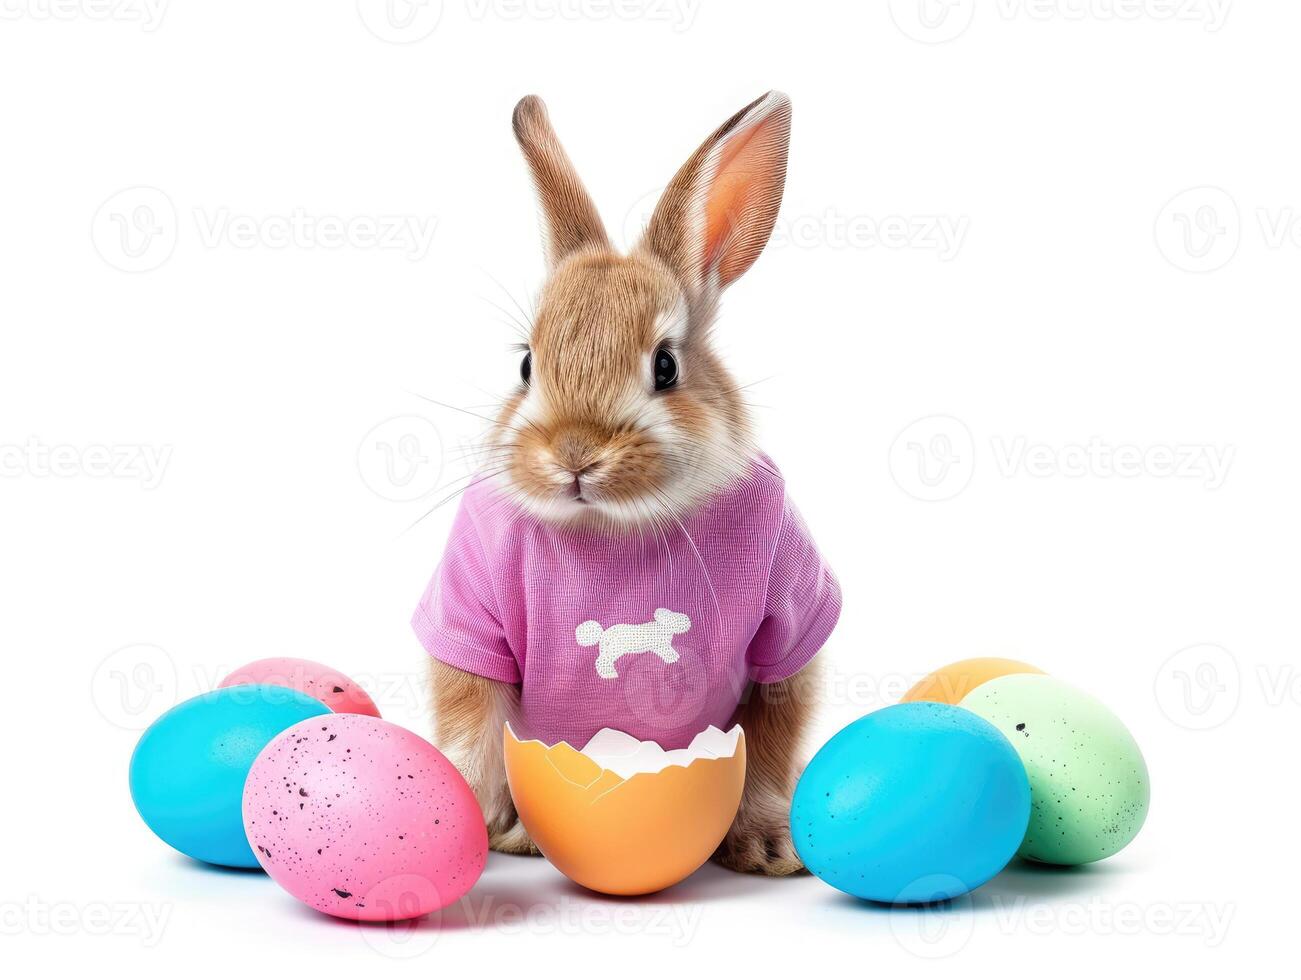 A rabbit wearing a cute shirt emerges from the big egg with beautiful colorful shells on a white background. photo